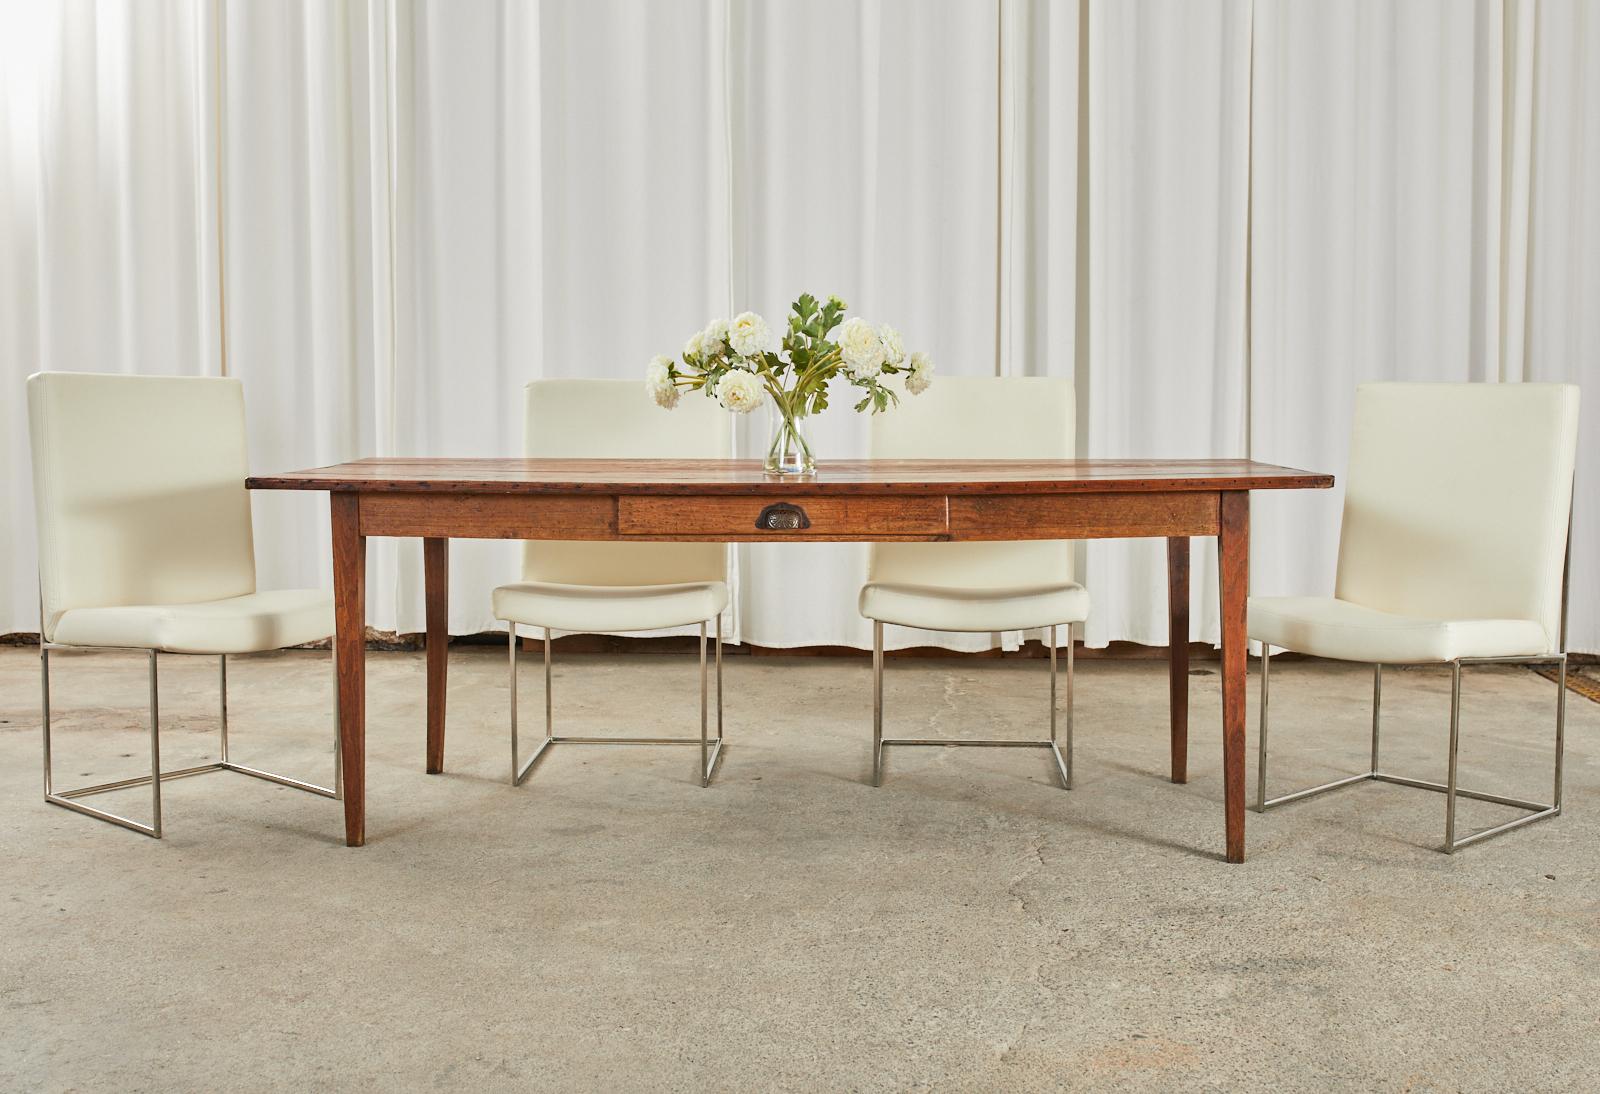 Elegant country English farmhouse dining or harvest table crafted from pine. The farm table features a 4 plank top with a thin border trim. There is a storage drawer in the frieze on one side with a patinated brass pull. Constructed with wood peg